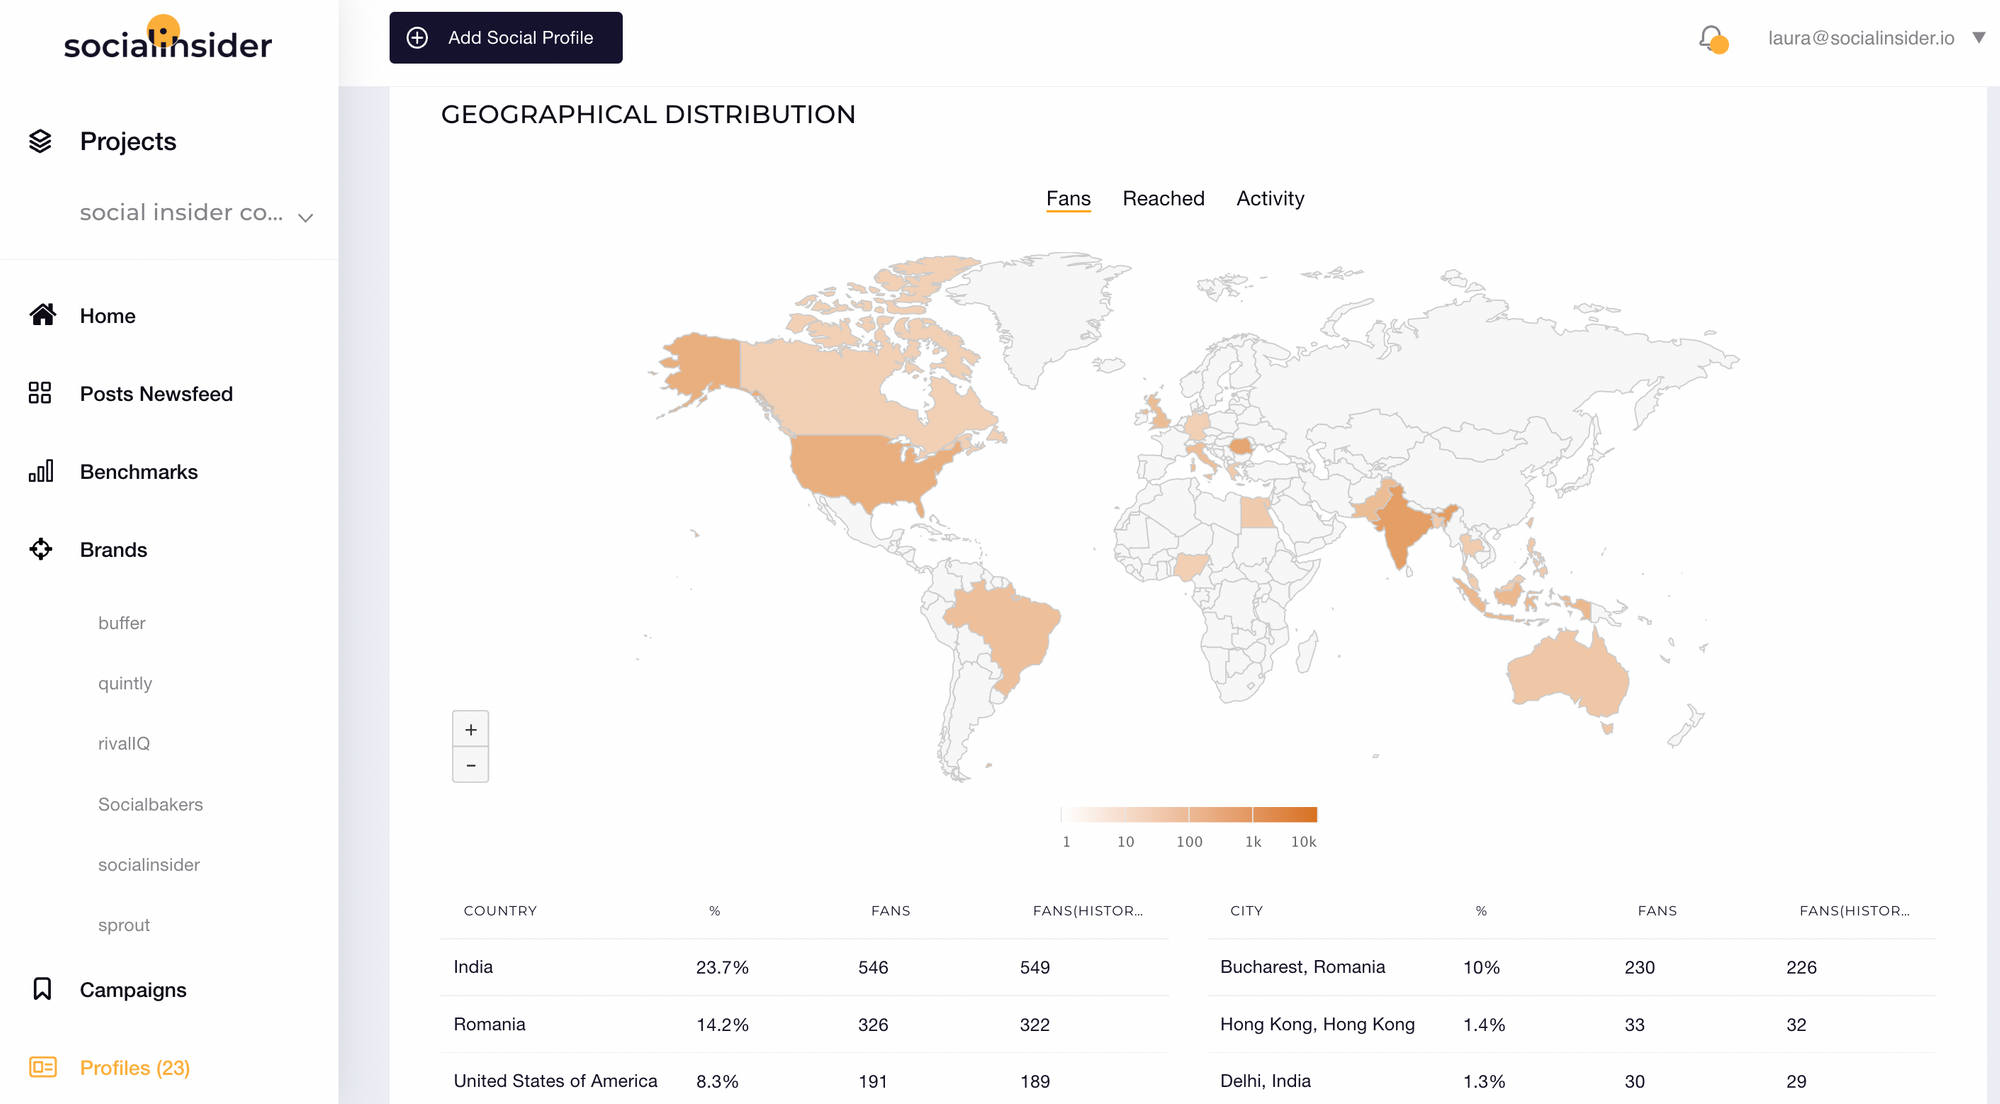 Here is the geographical distribution of followers on Facebook for Socialinsider